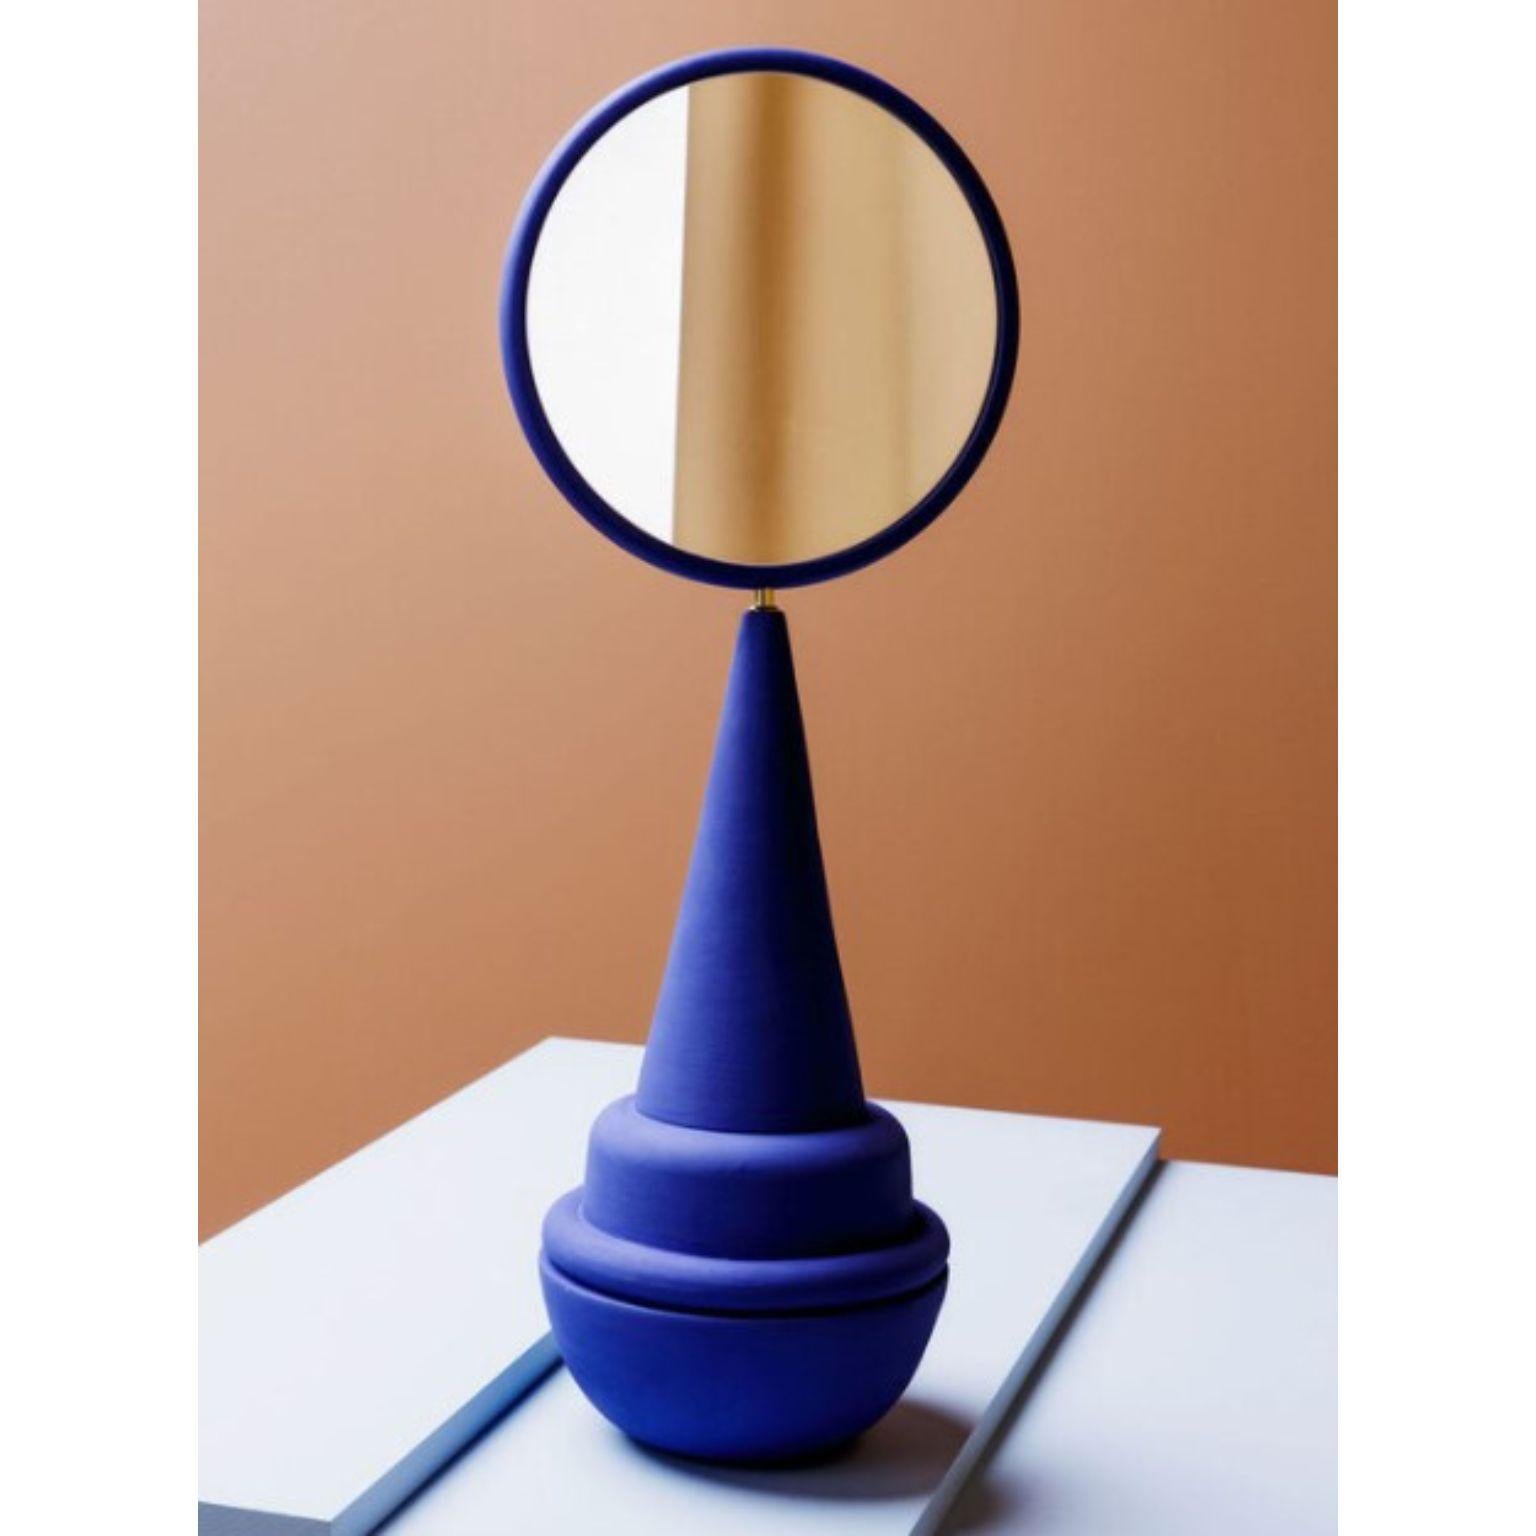 Marrakesh large table mirror by Tero Kuitunen
Material: slip cast terracotta, Mdf, chalk paint, mirror, brass.
Dimensions: D 30 x H 58 cm
Edition of 8
Also available: different colors (Blue, Brown) and different dimensions.

Inspired by the